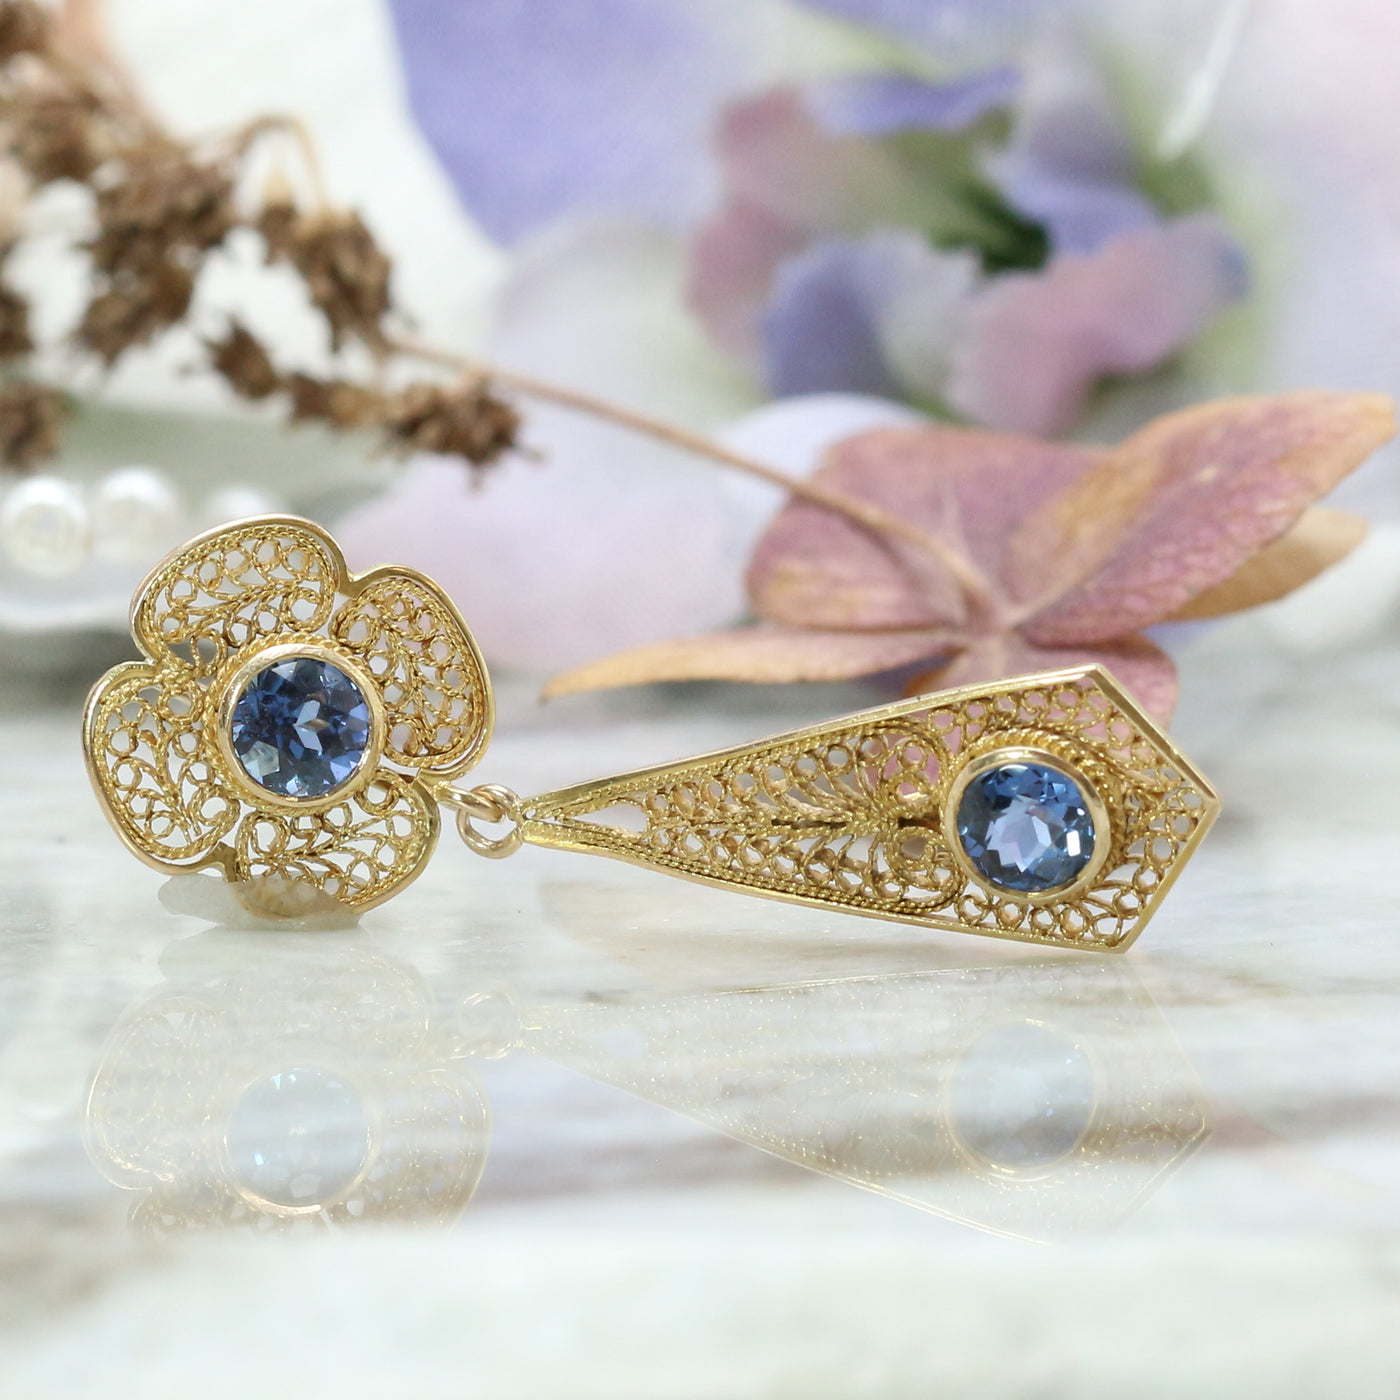 Filigree and Sapphires